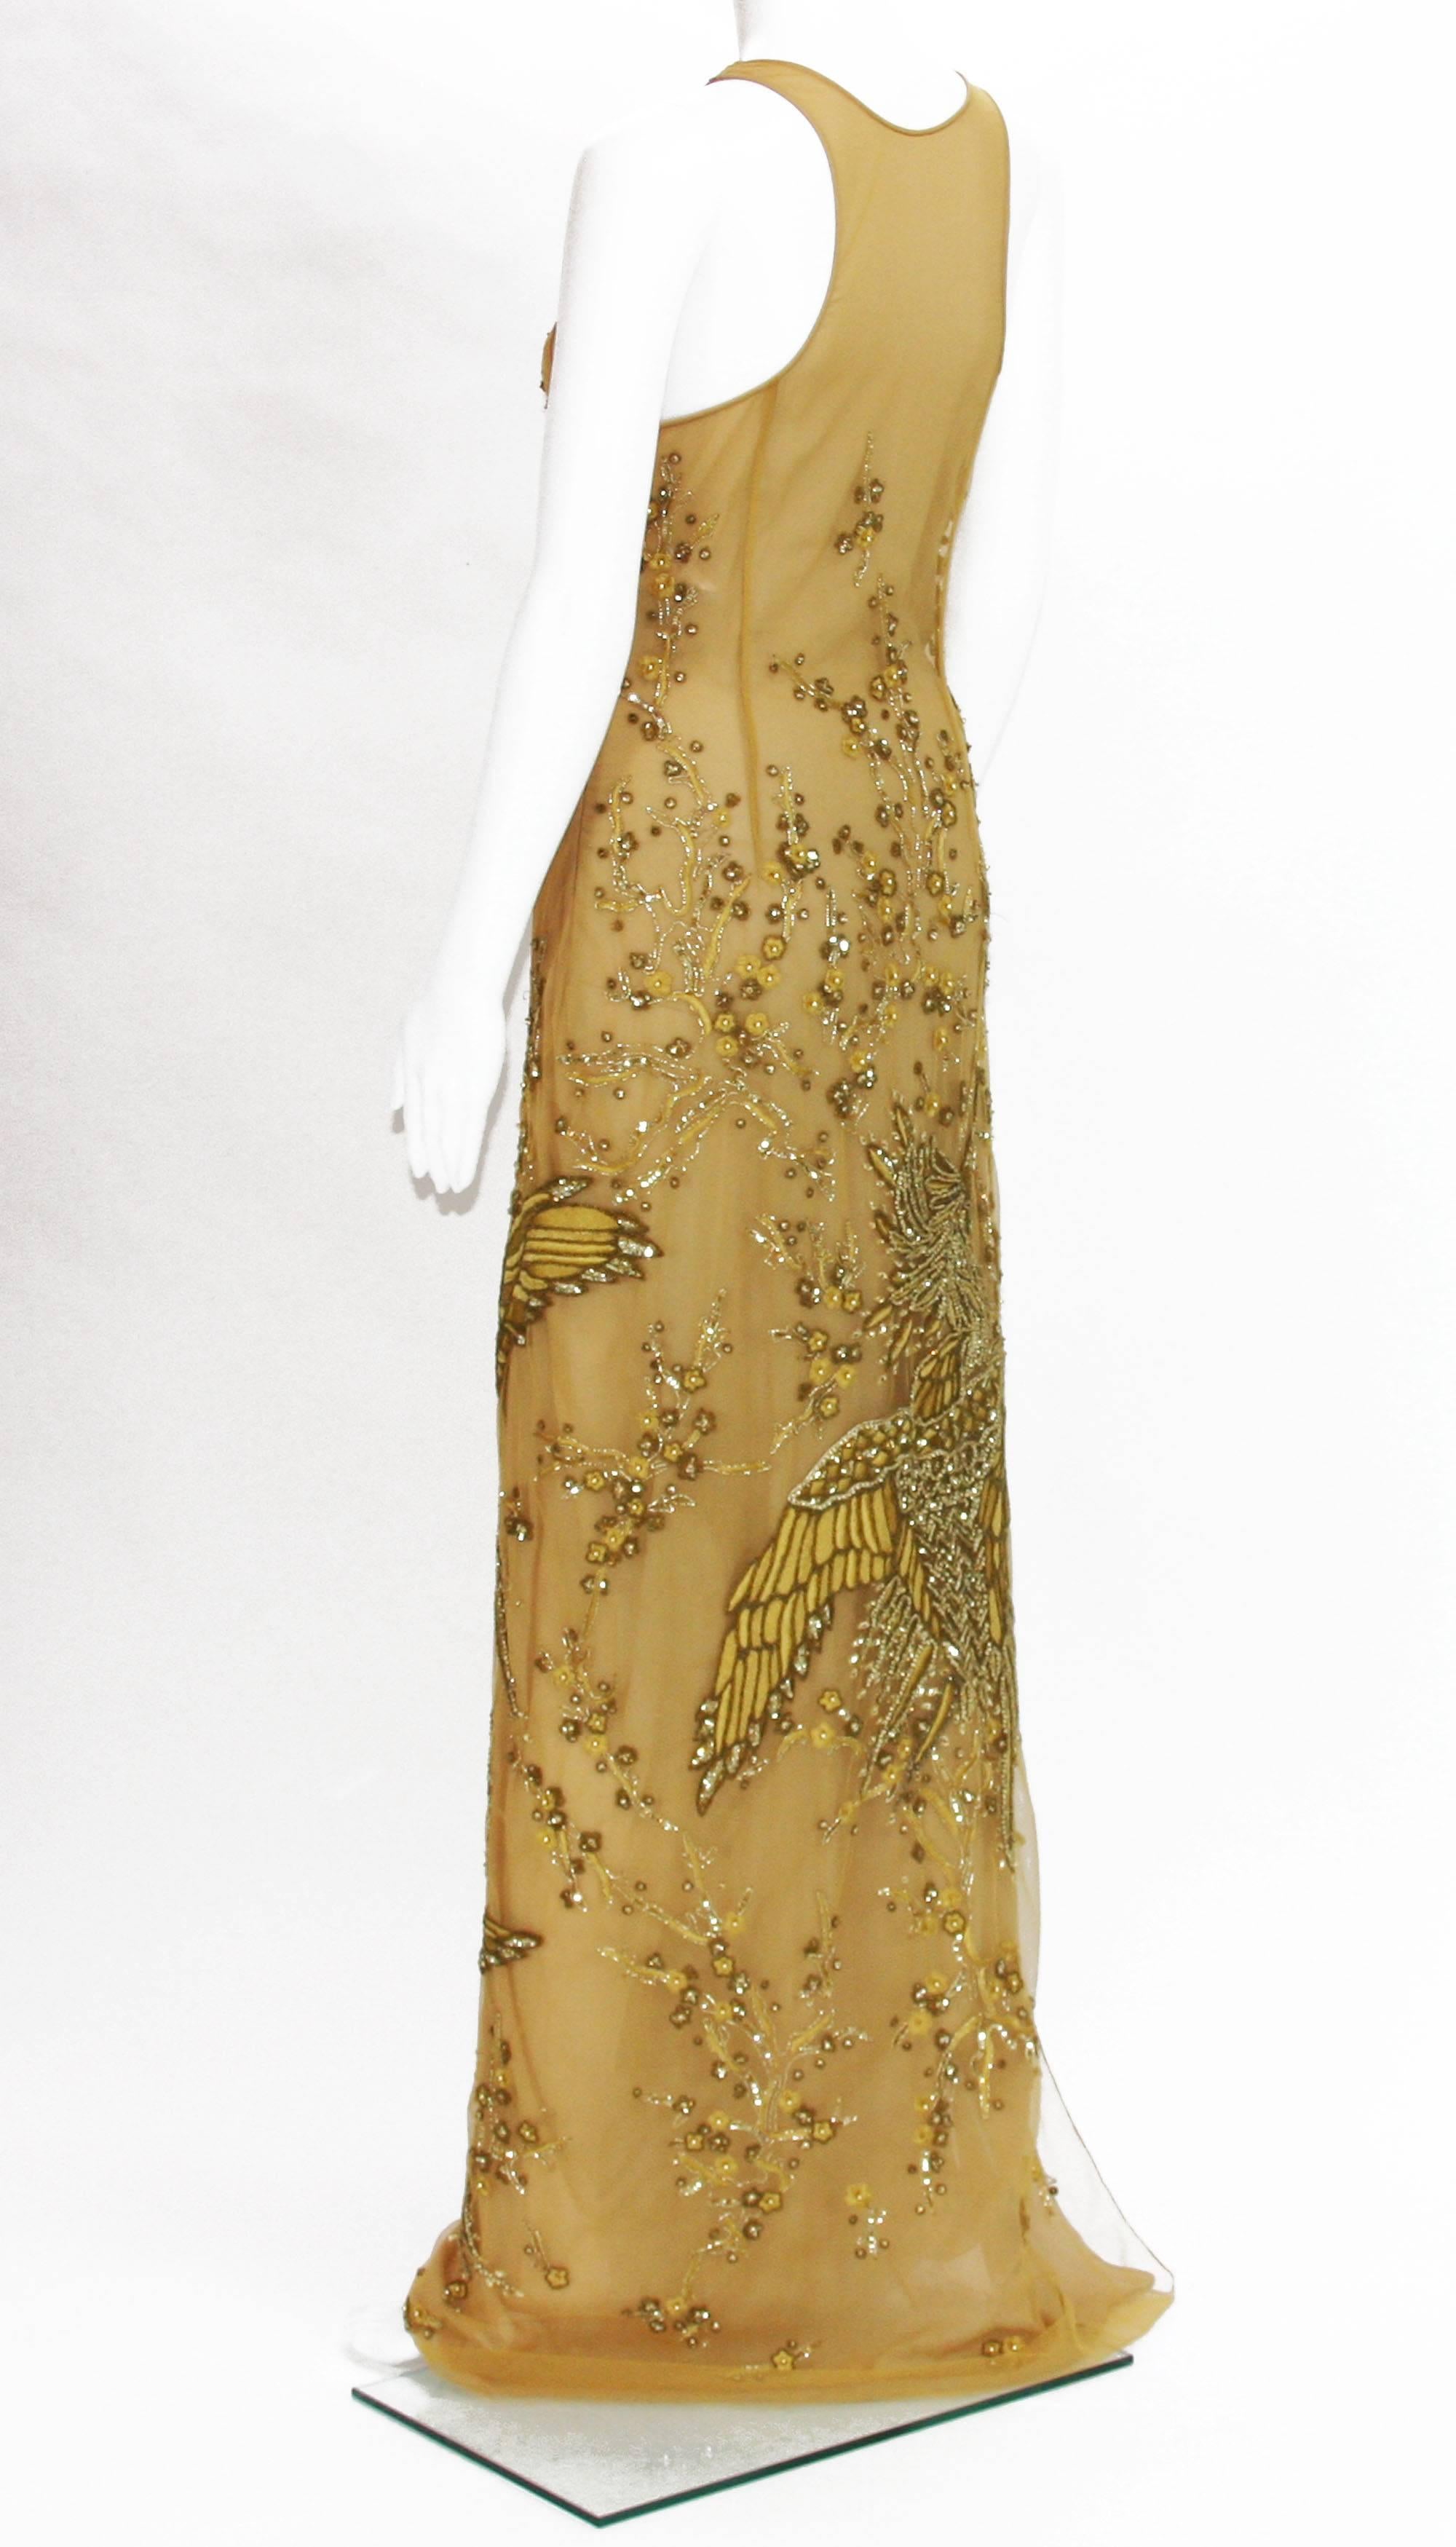 New Emilio Pucci Incredible Fully Beaded and Embroidered Dress Gown 42 1